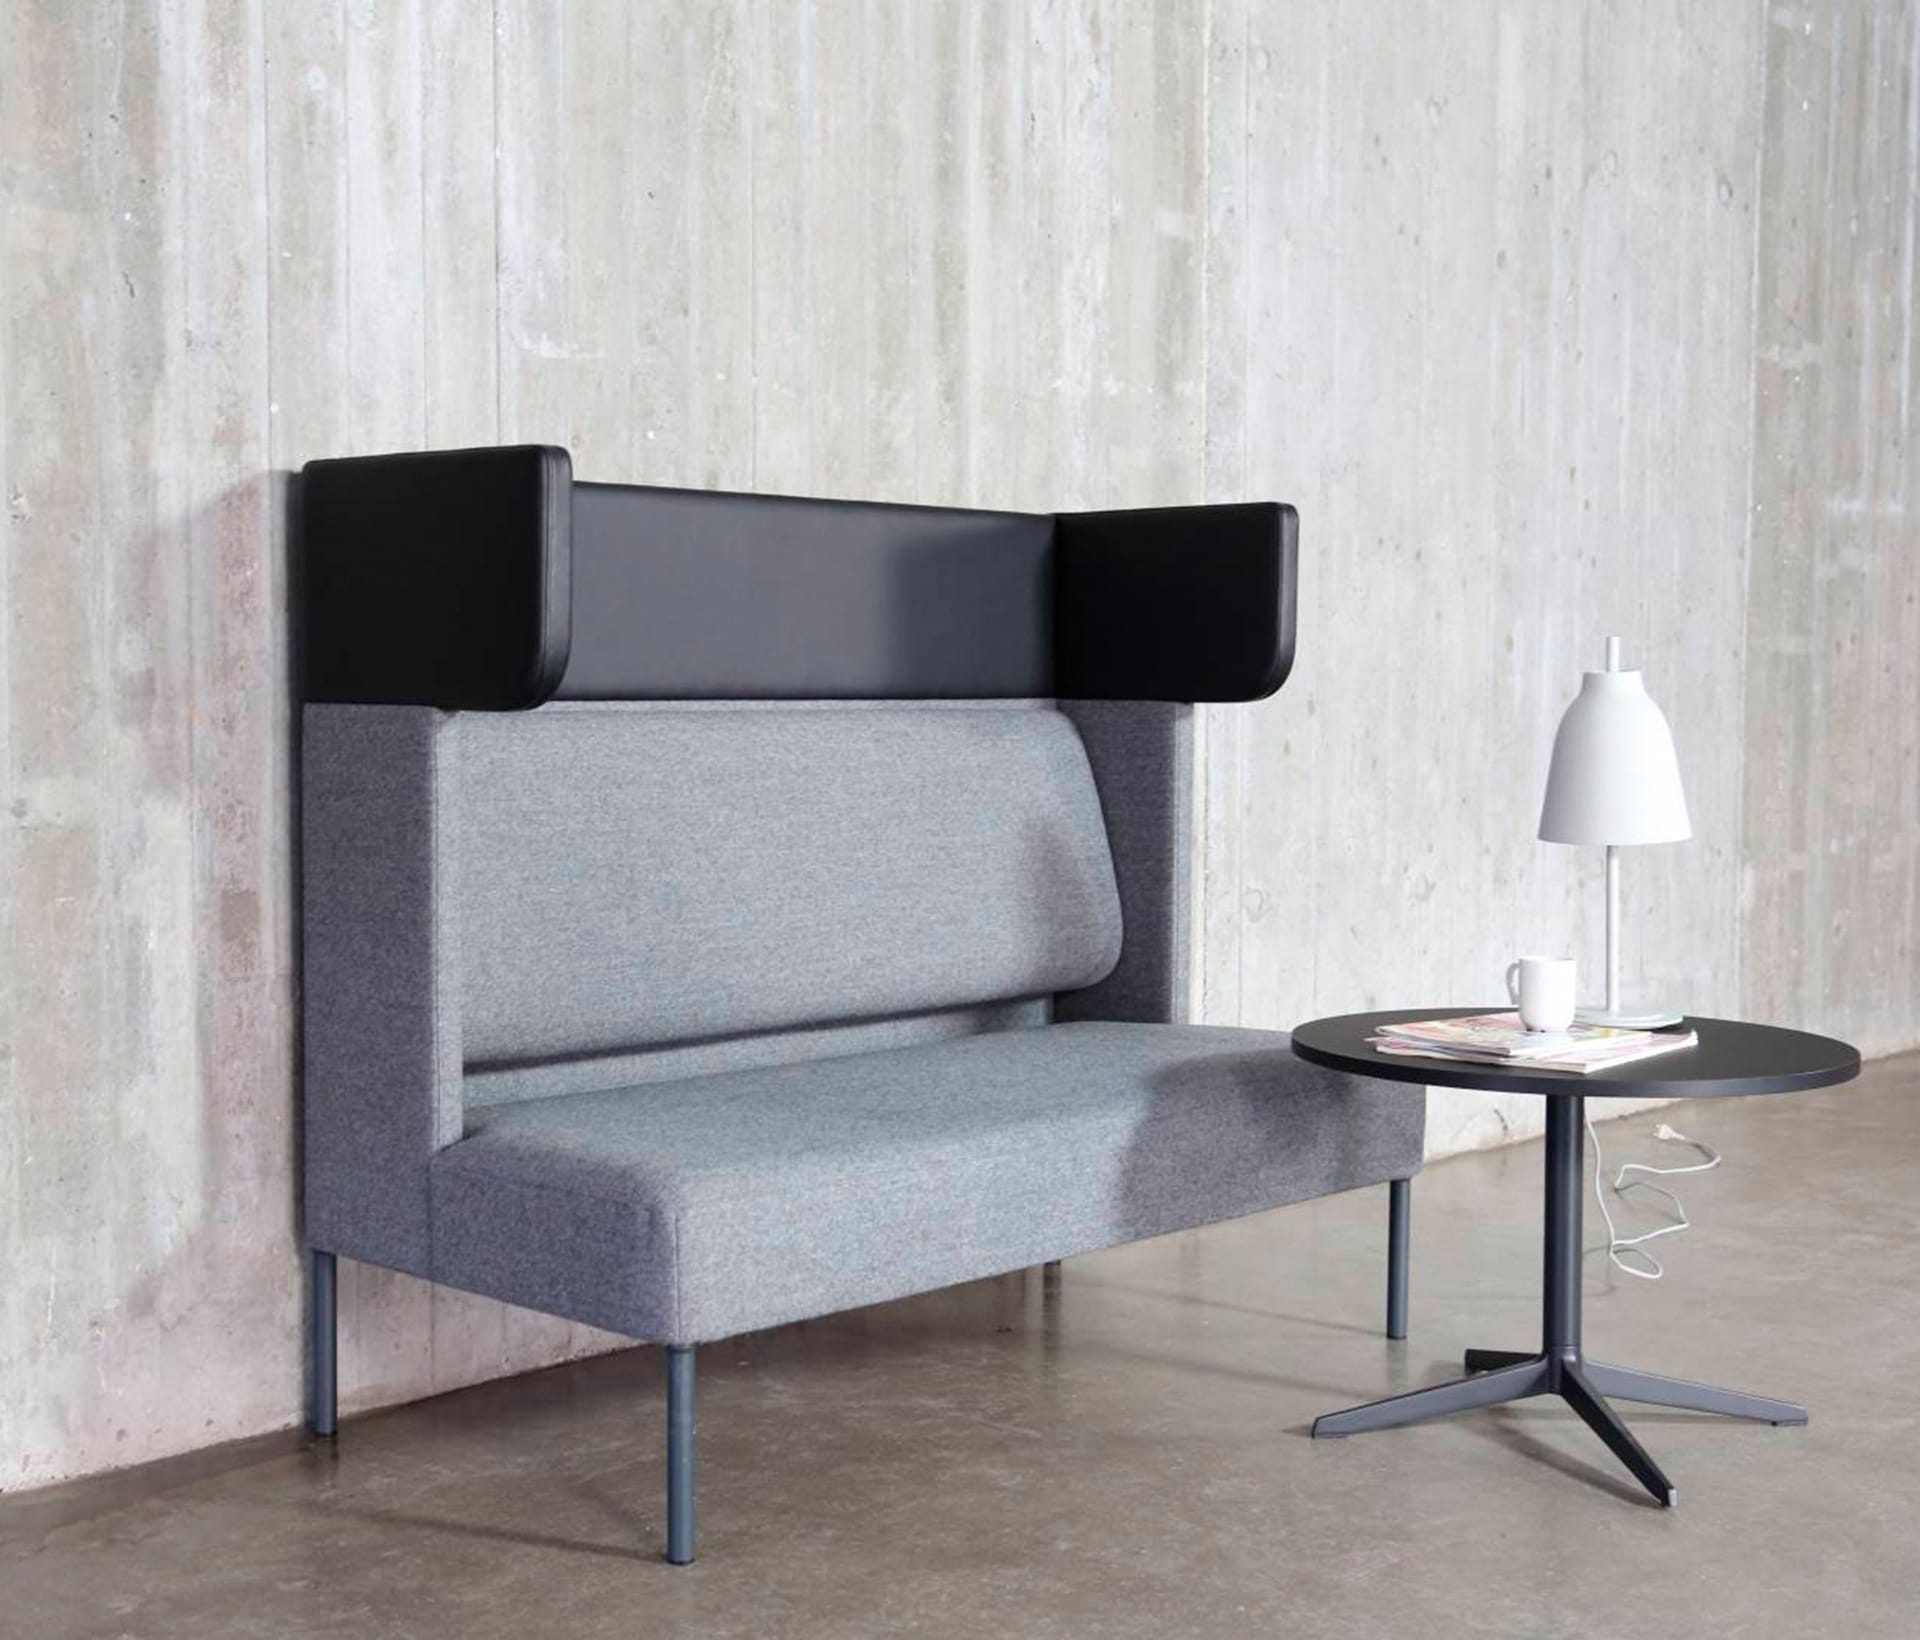 A grey couch with a table and lamp in front of a concrete wall.